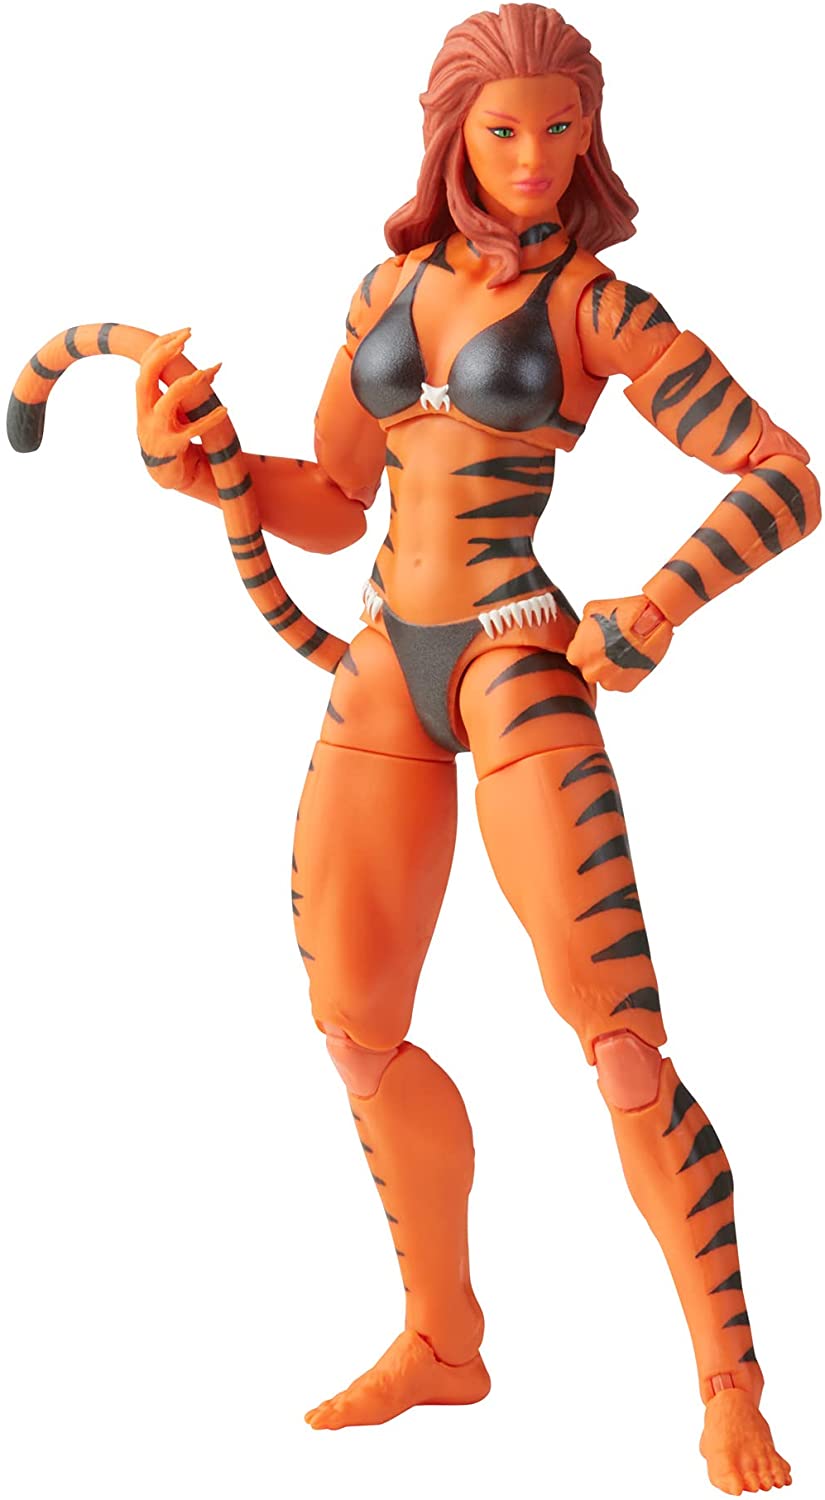 Marvel Legends Series Avengers 15-cm-scale Marvel’s Tigra Figure, for Children Aged 4 And Up